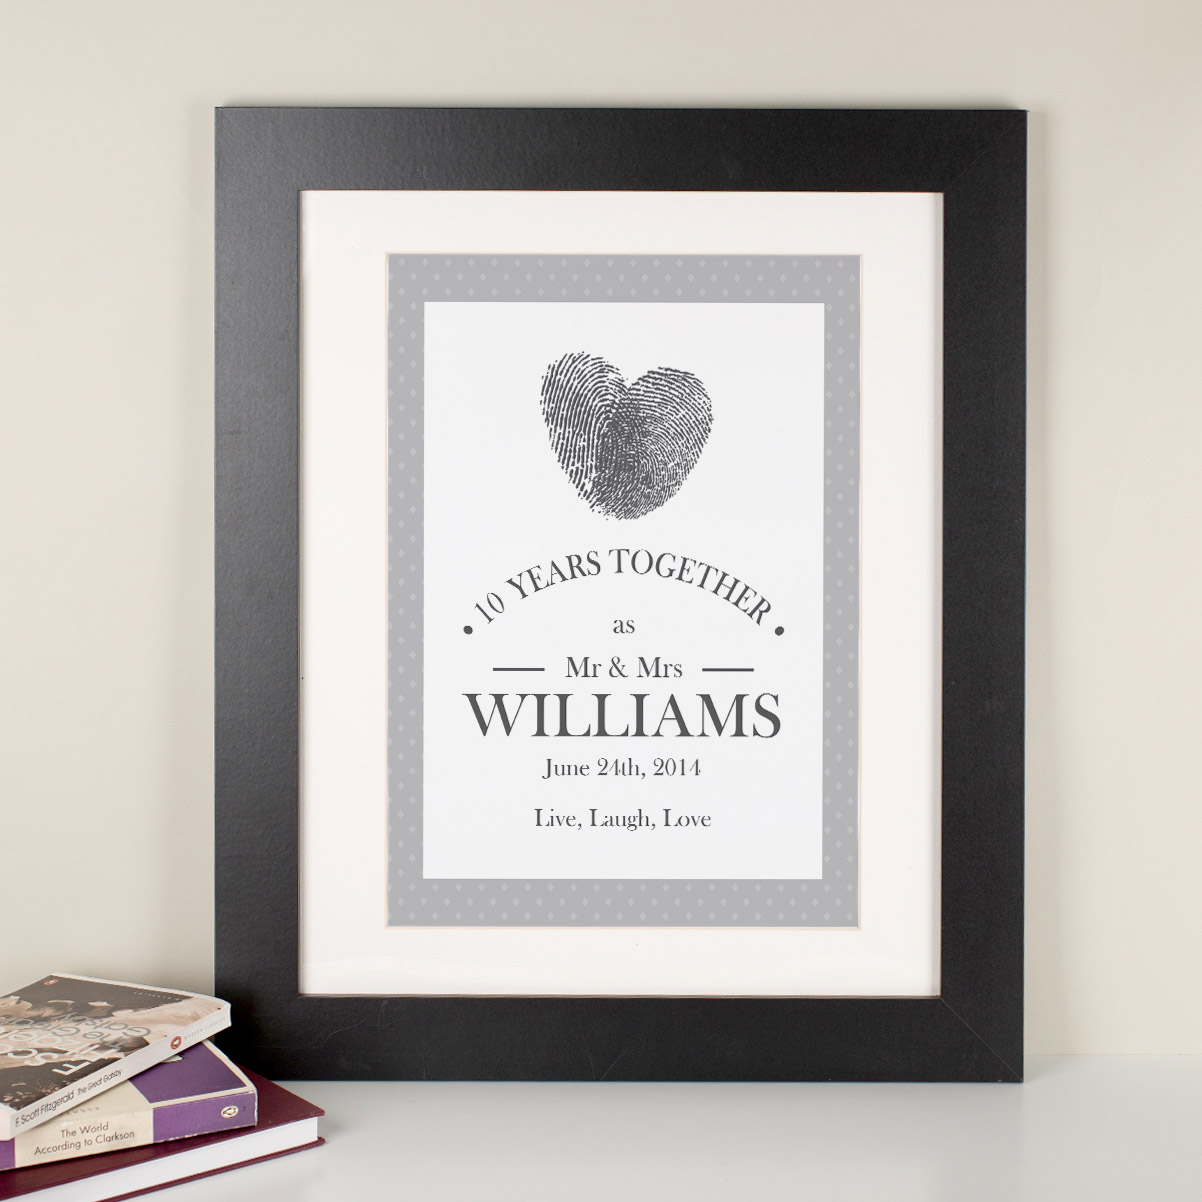 Personalised Framed Print - Live Laugh Love